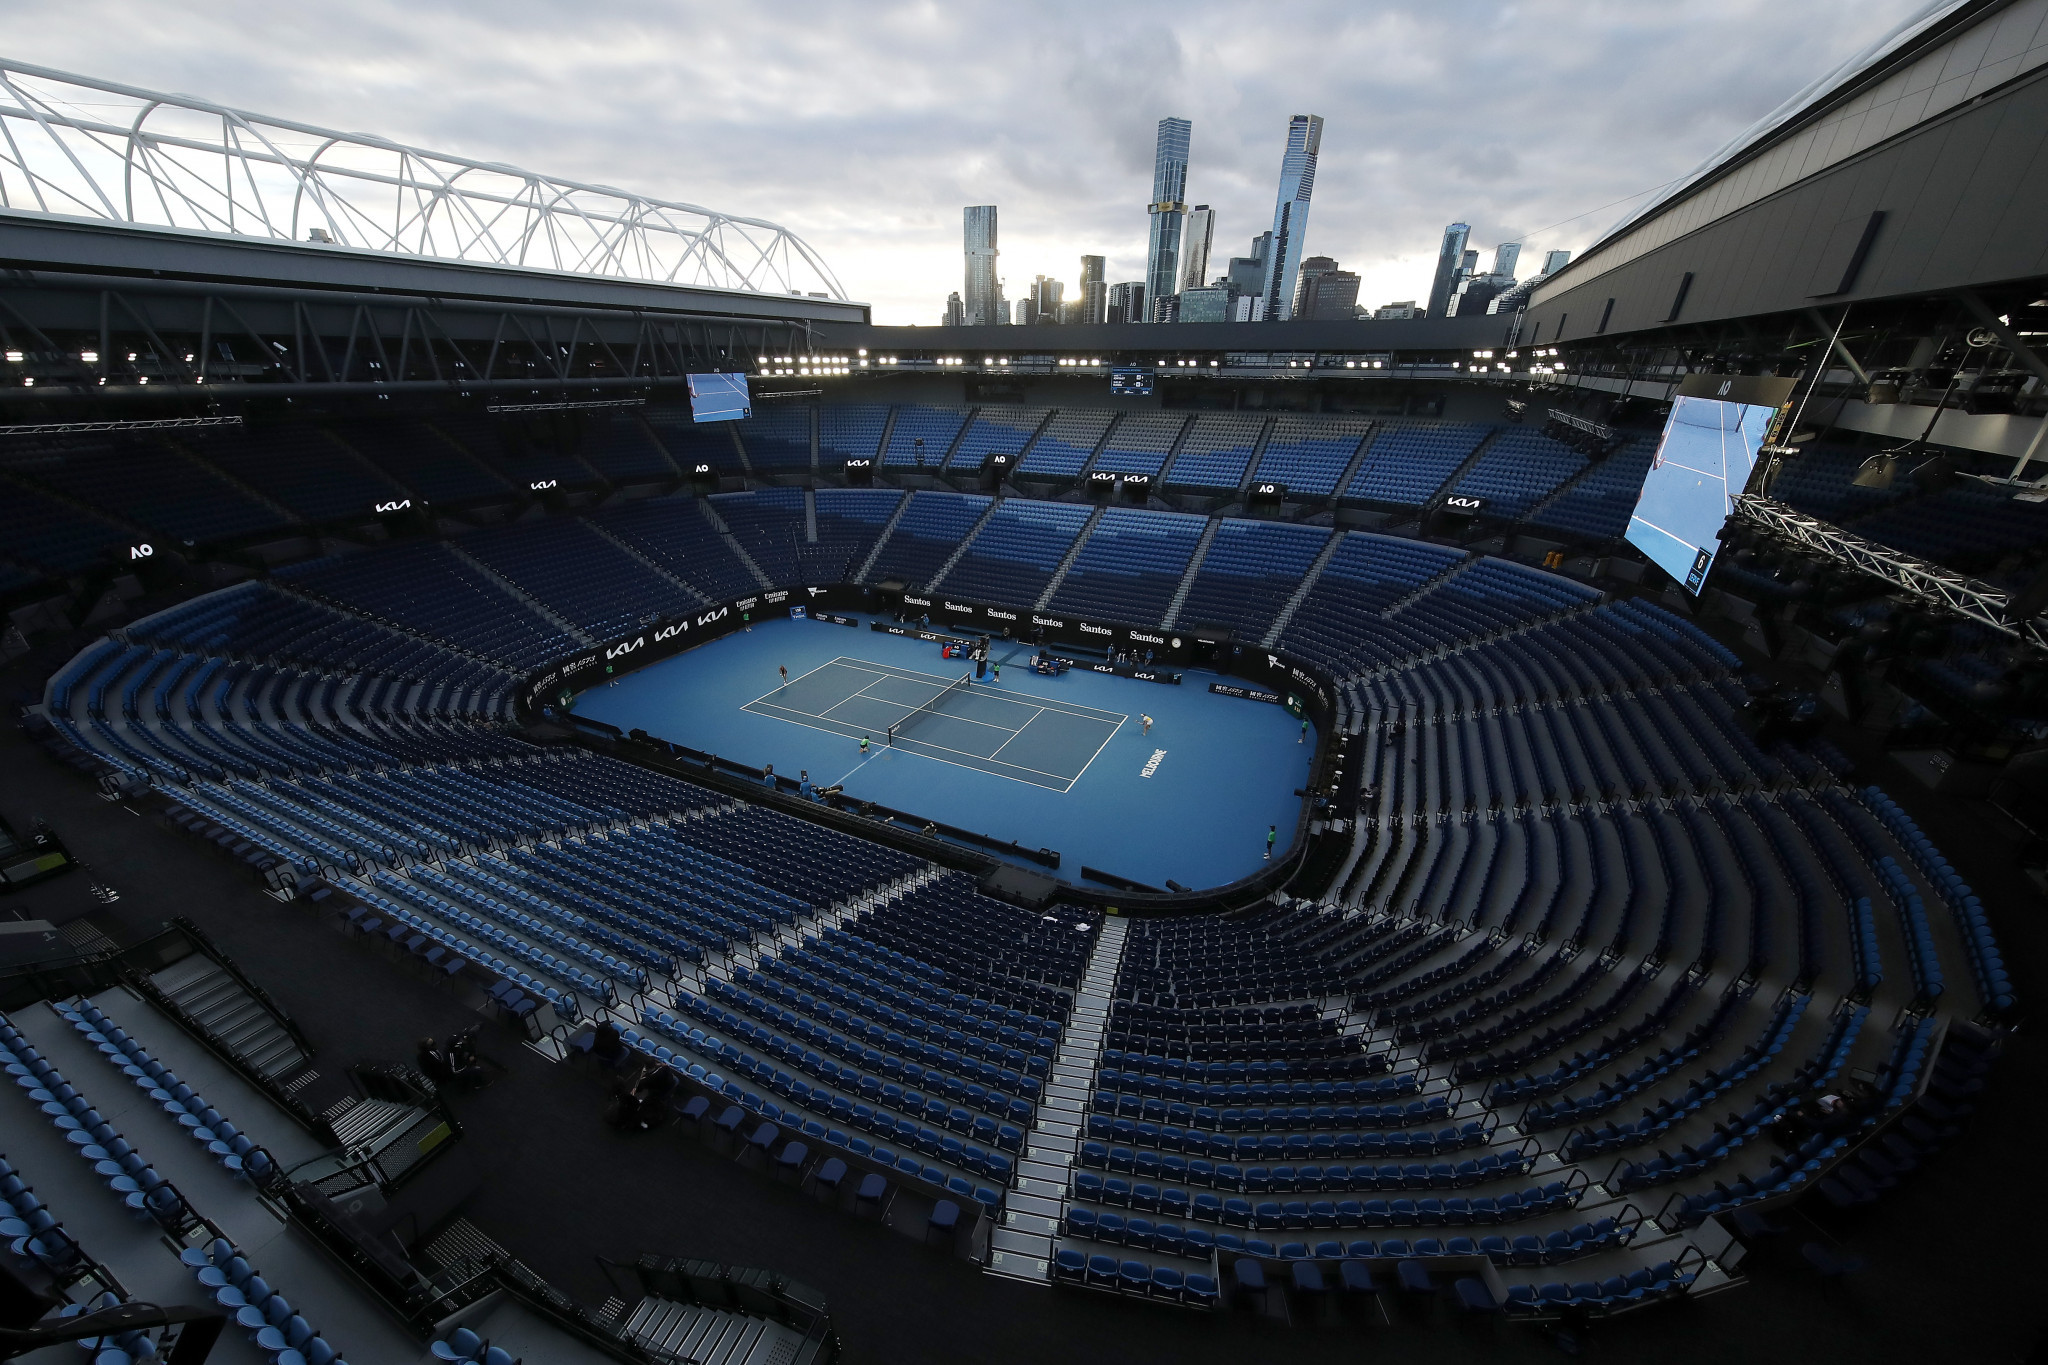 Crowds at the Australian Open venues, including the Rod Laver Arena, will be reduced by half in compliance with Victoria's COVID-19 restrictions ©Getty Images